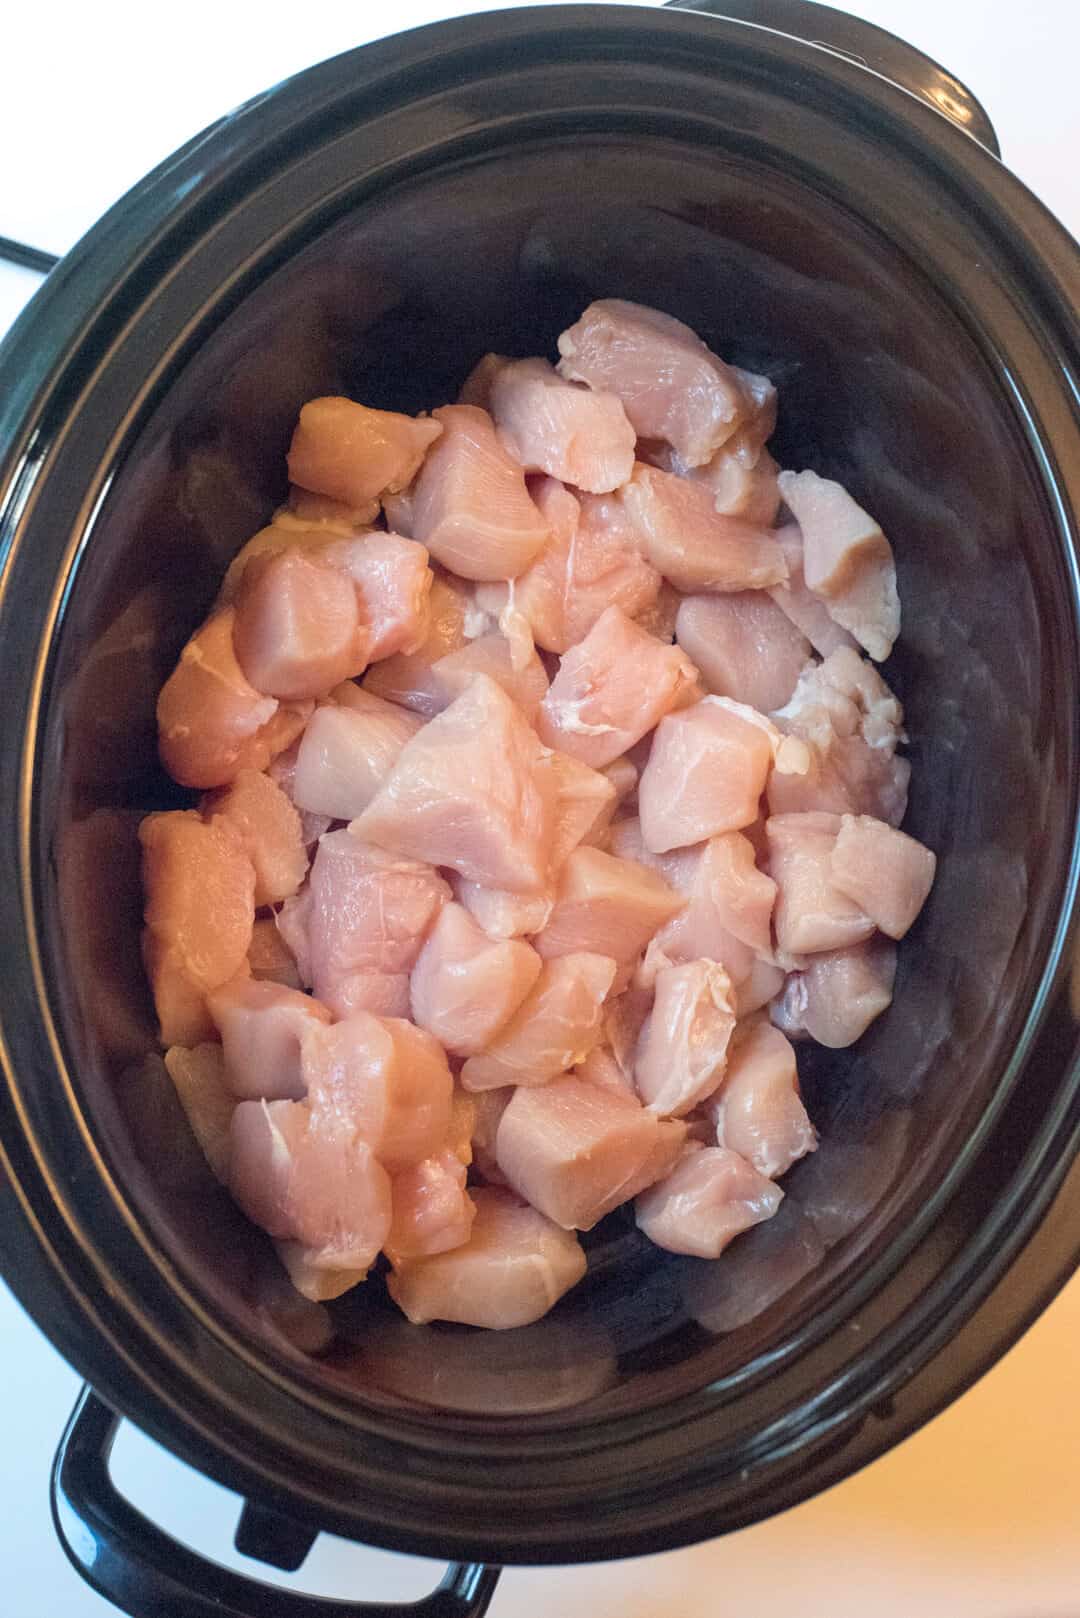 Raw, chopped chicken in a slow cooker.